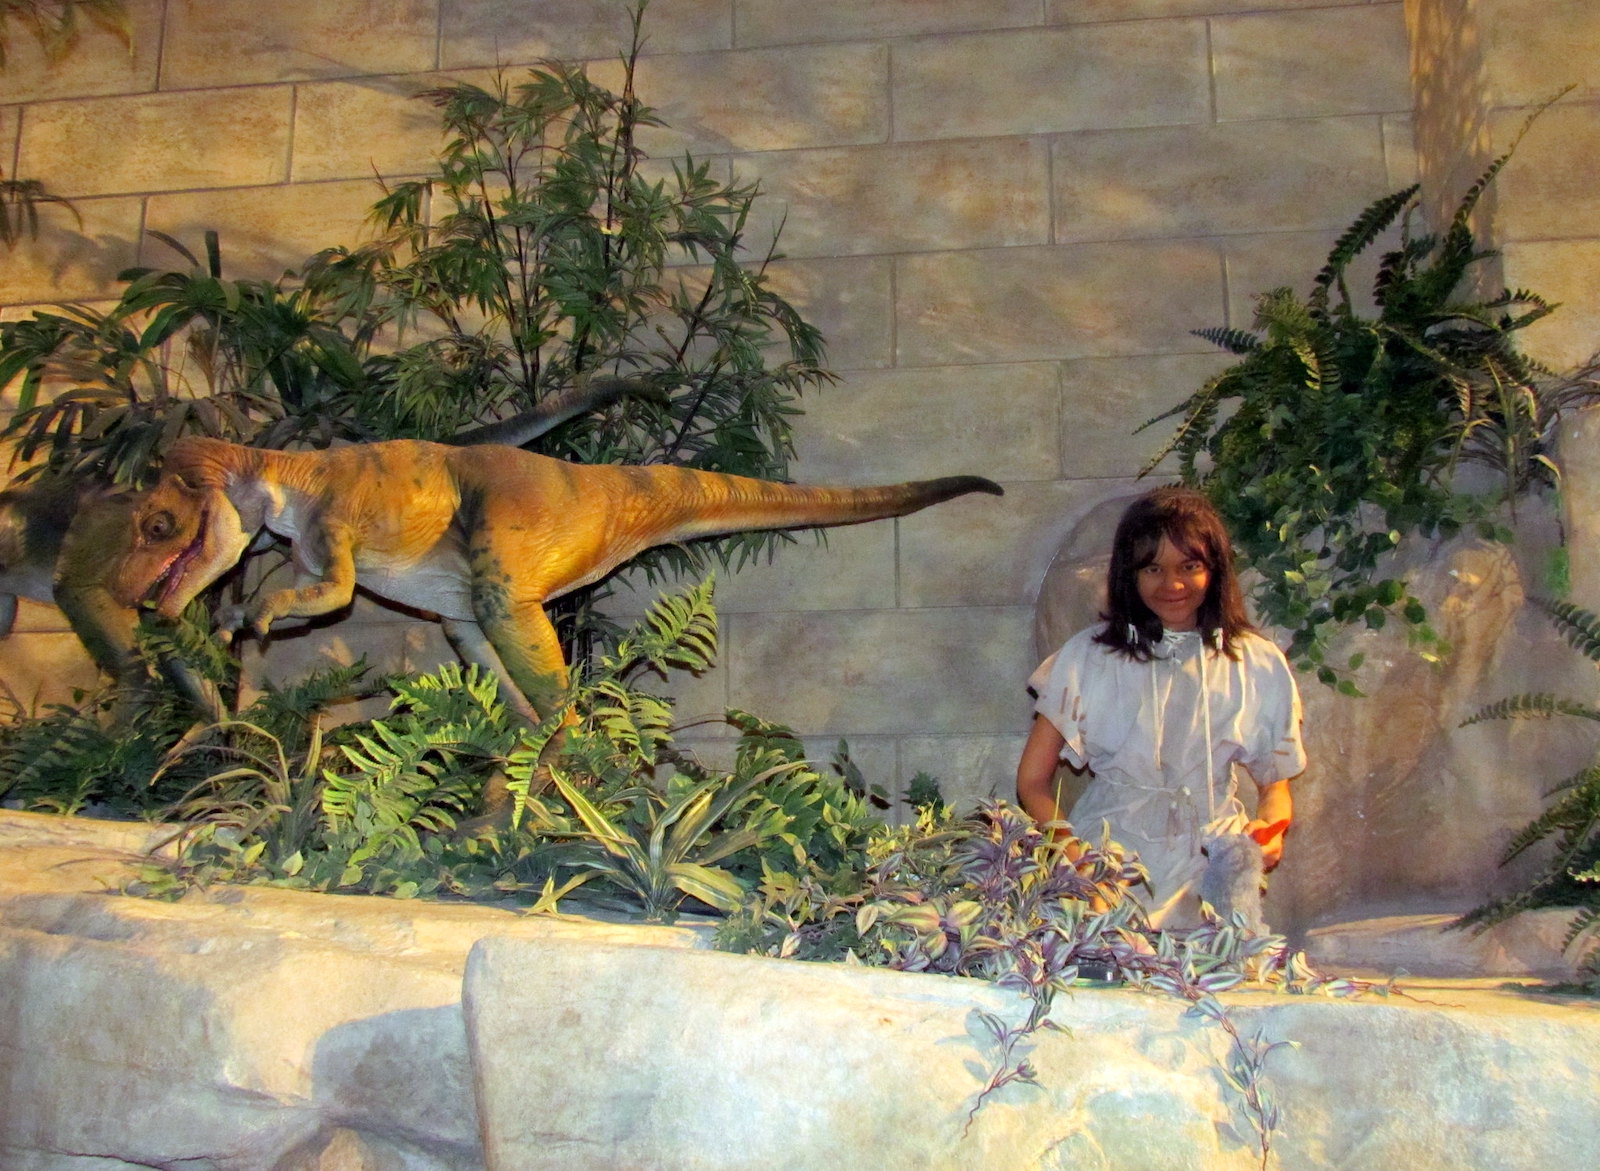 A somewhat creepy-feeling exhibit of a young girl near a velociraptor. They are surrounded by plastic ferns and other foliage.